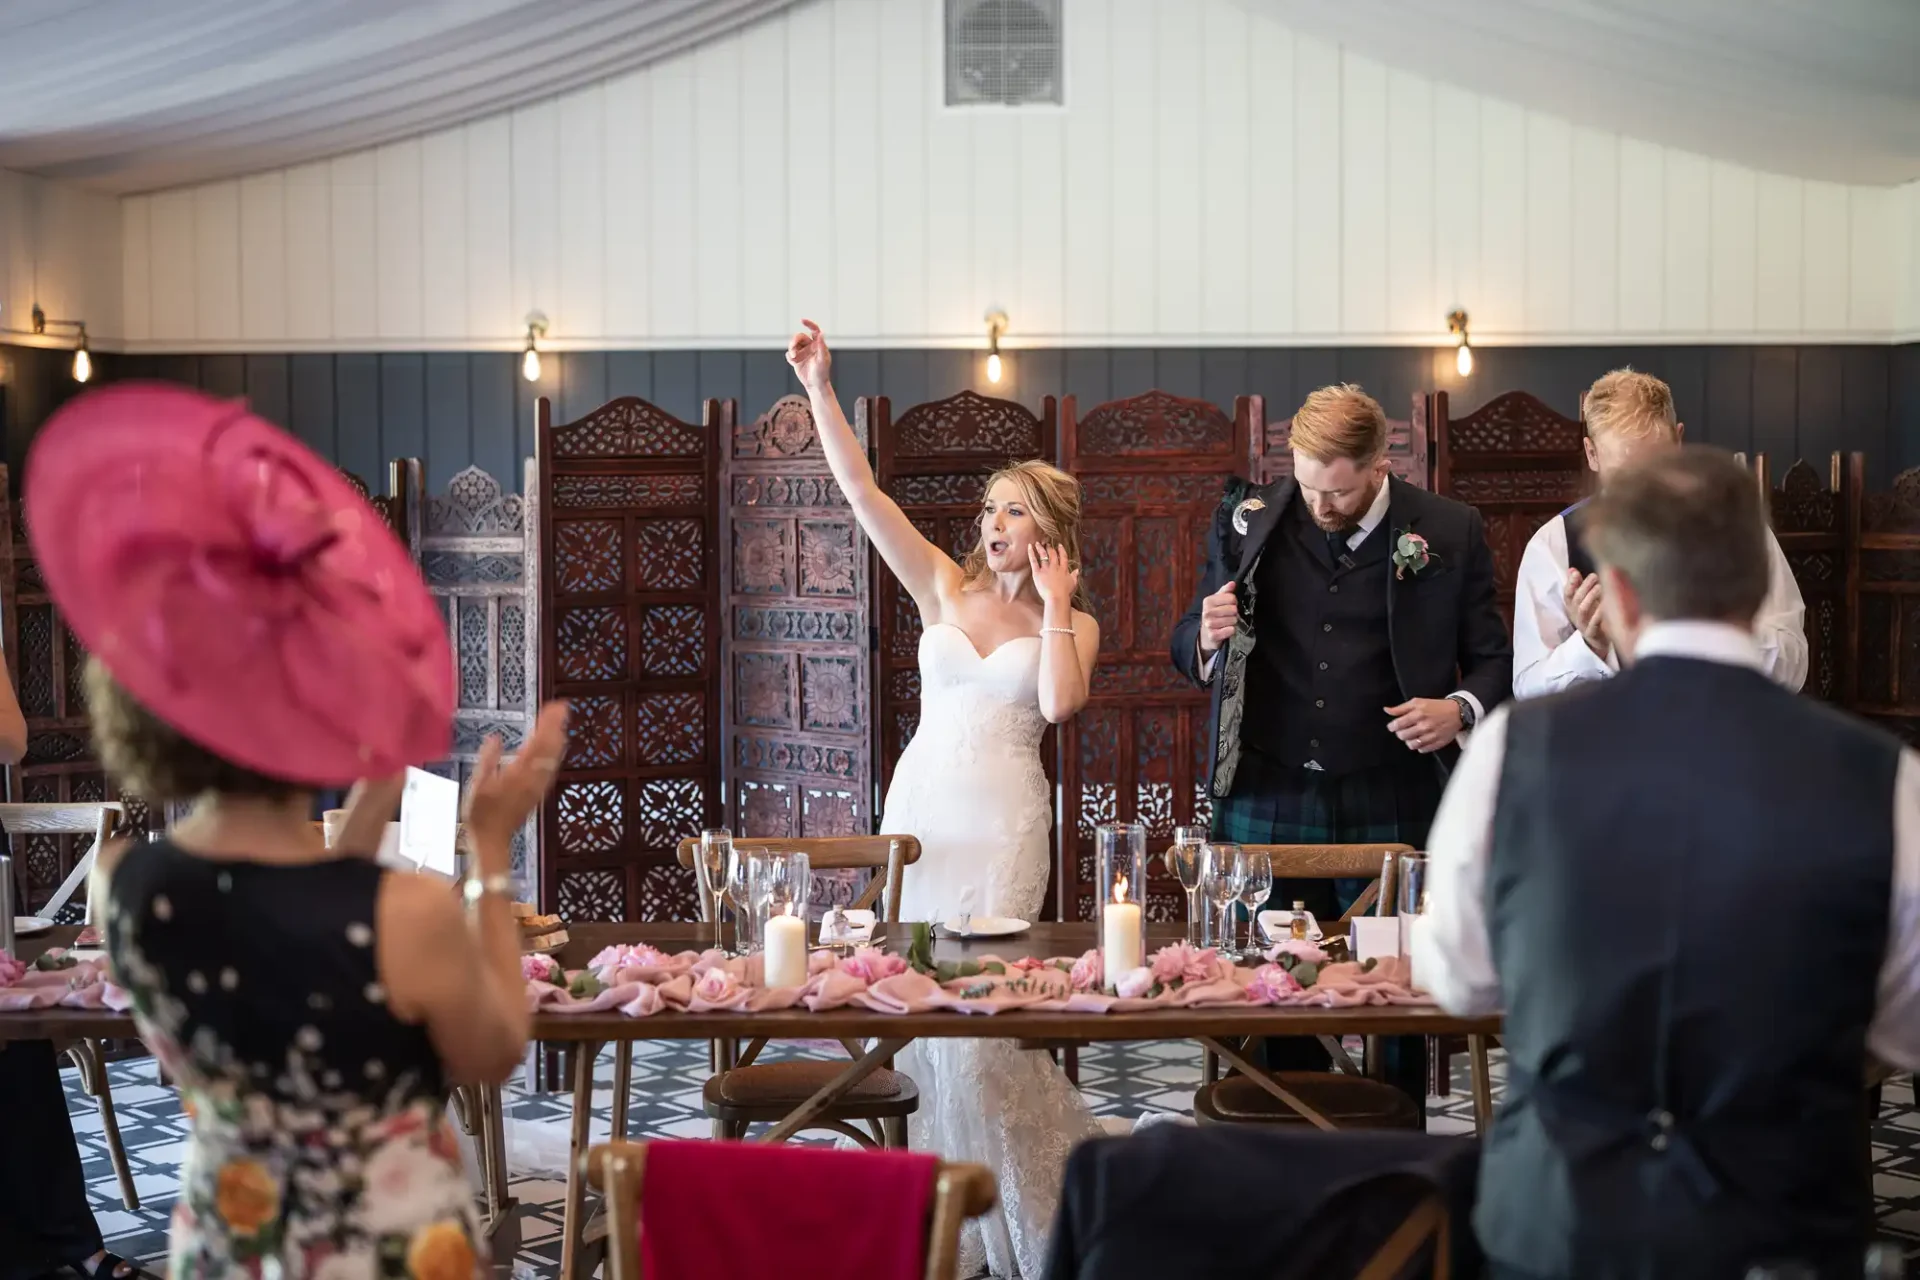 A bride joyfully raises her arm at a wedding reception as guests look on, surrounded by elegantly decorated tables.